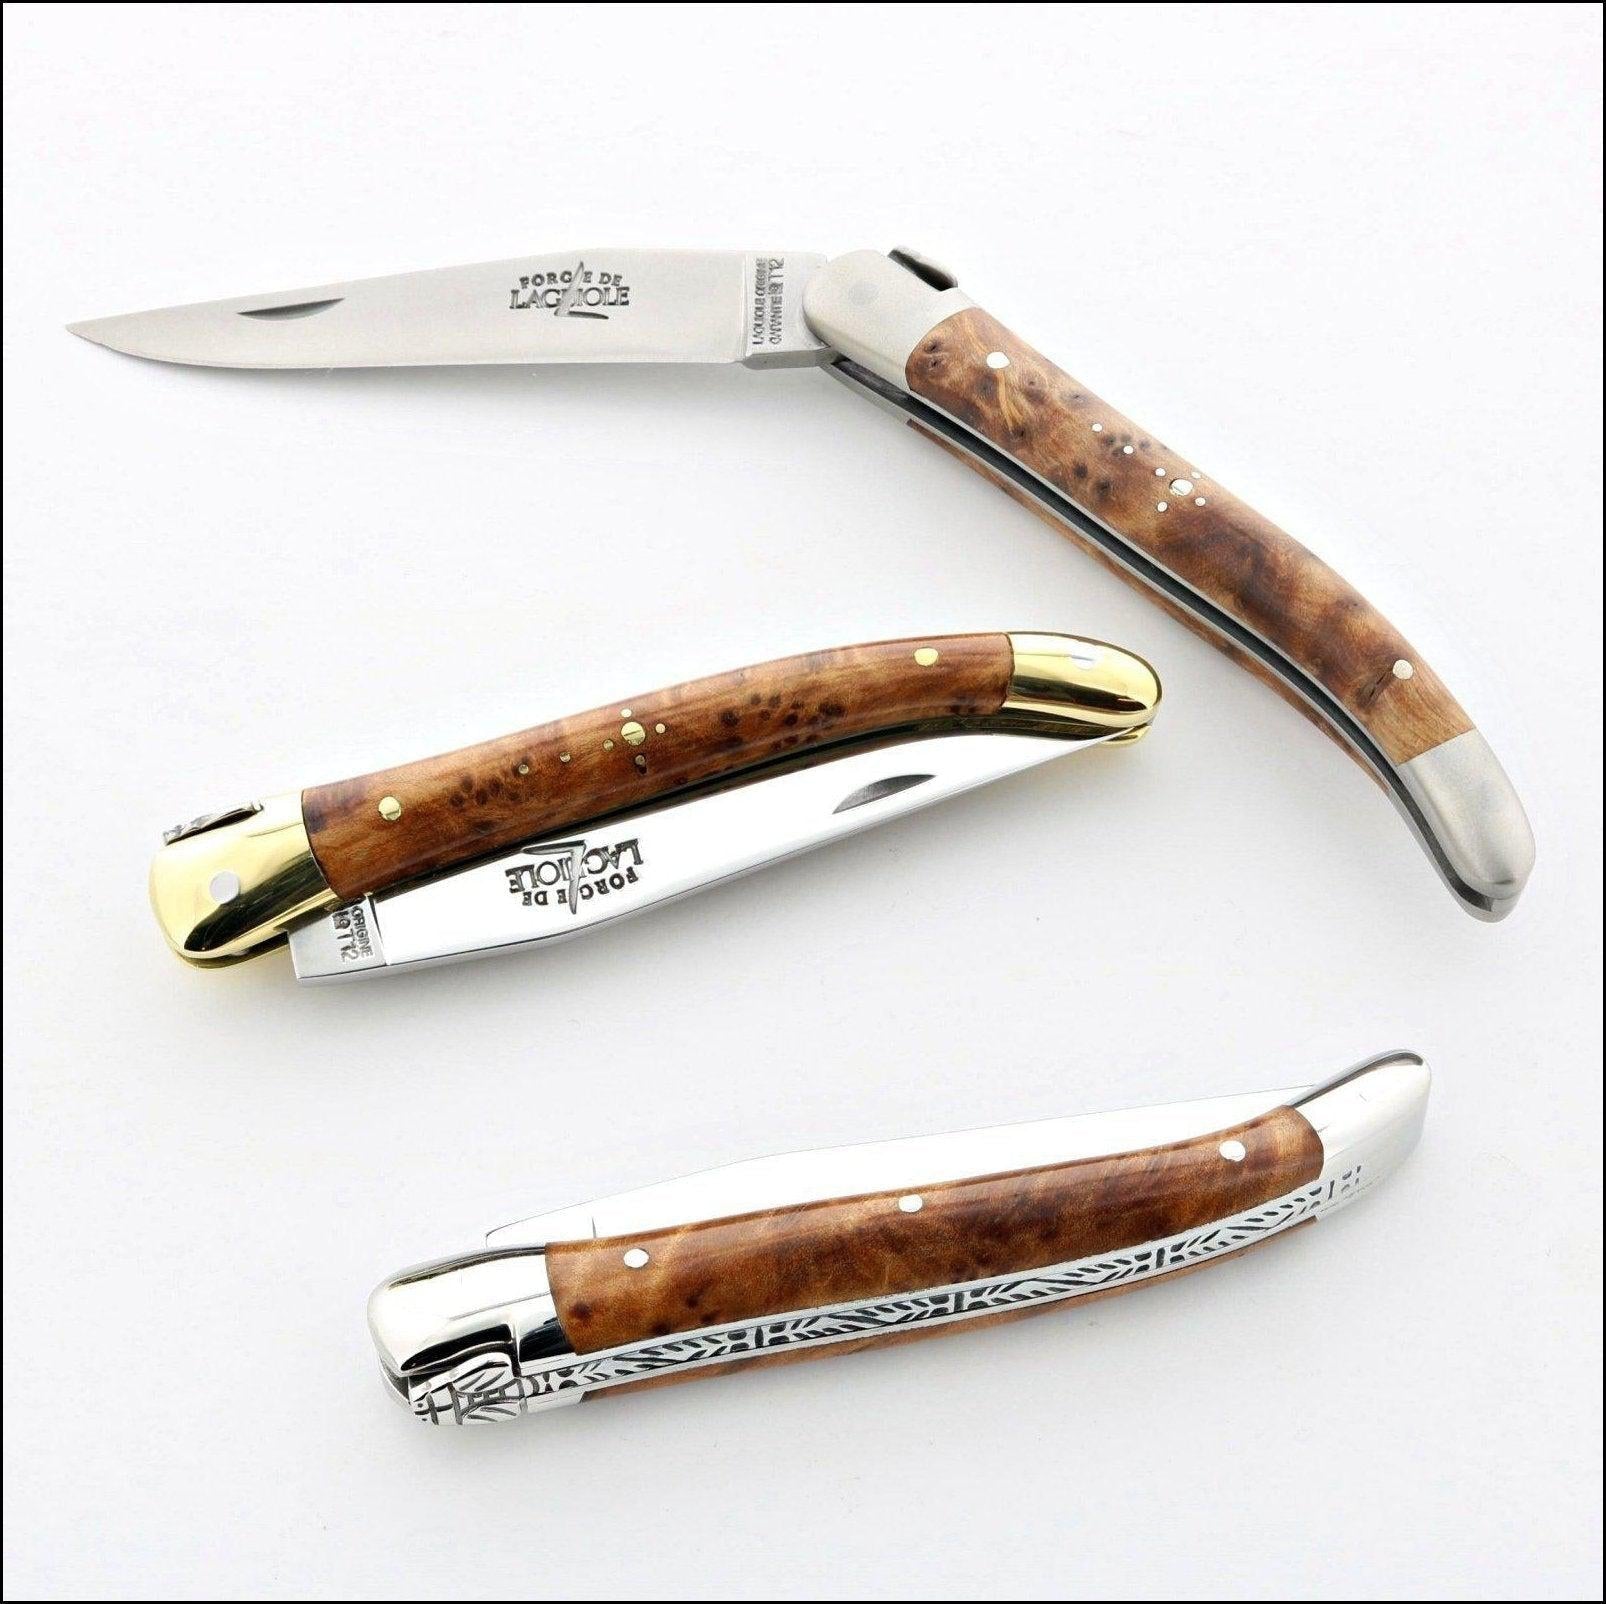 3 forge de laguiole 9 cm handle pocket knives in half open and close postion